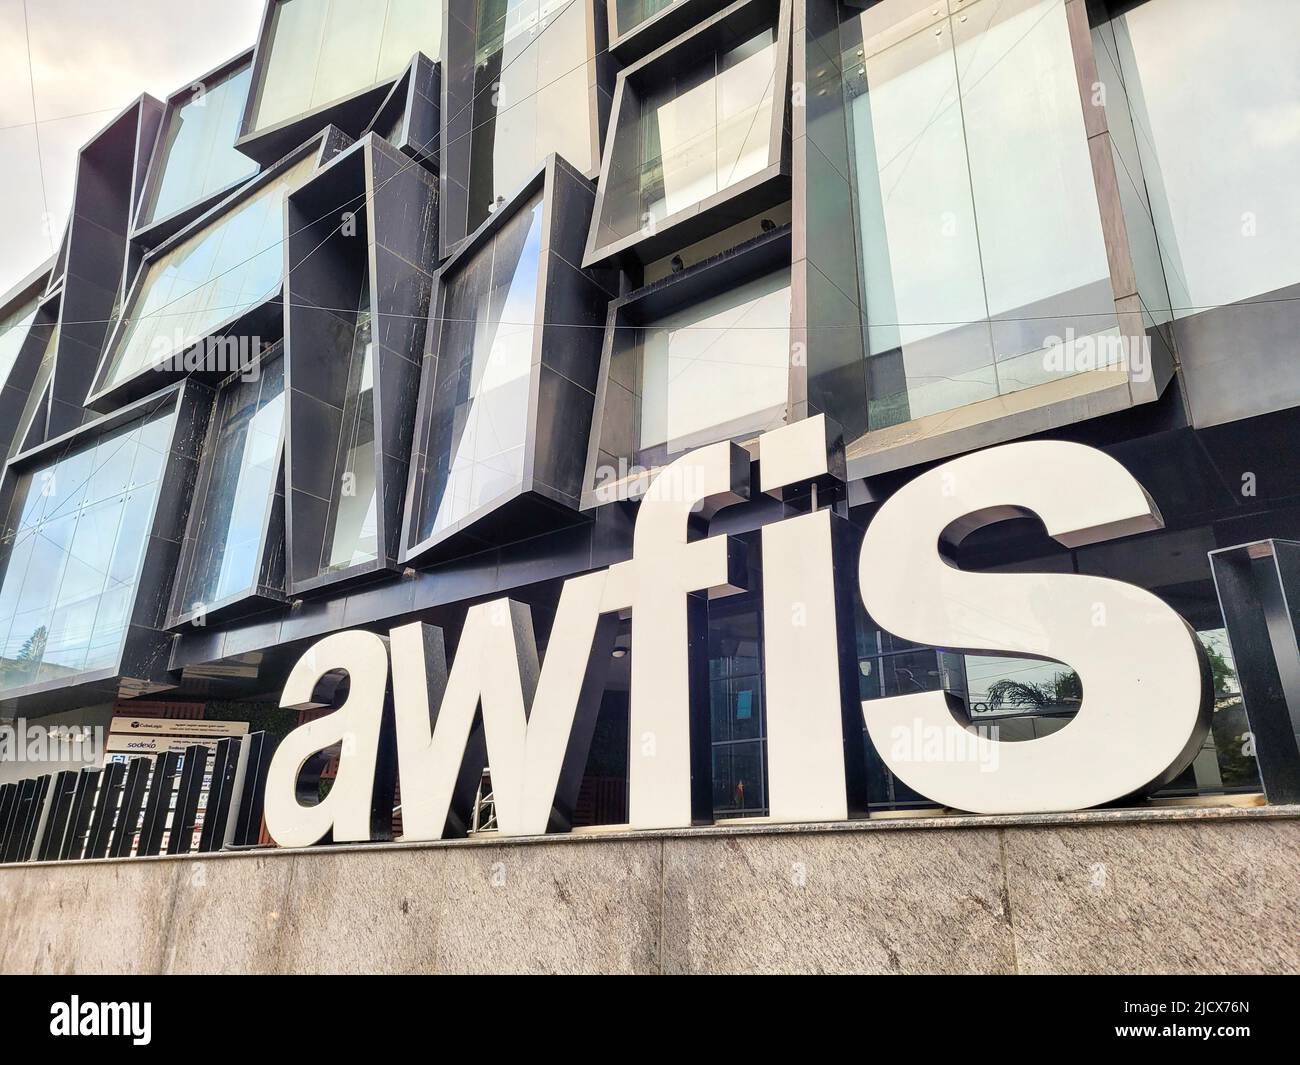 Bangalore, India - 30 November 2021: The Bangalore CBD outlet of Awfis, a co-working space in India. It currently has 121 centres with 70,000 seats ac Stock Photo